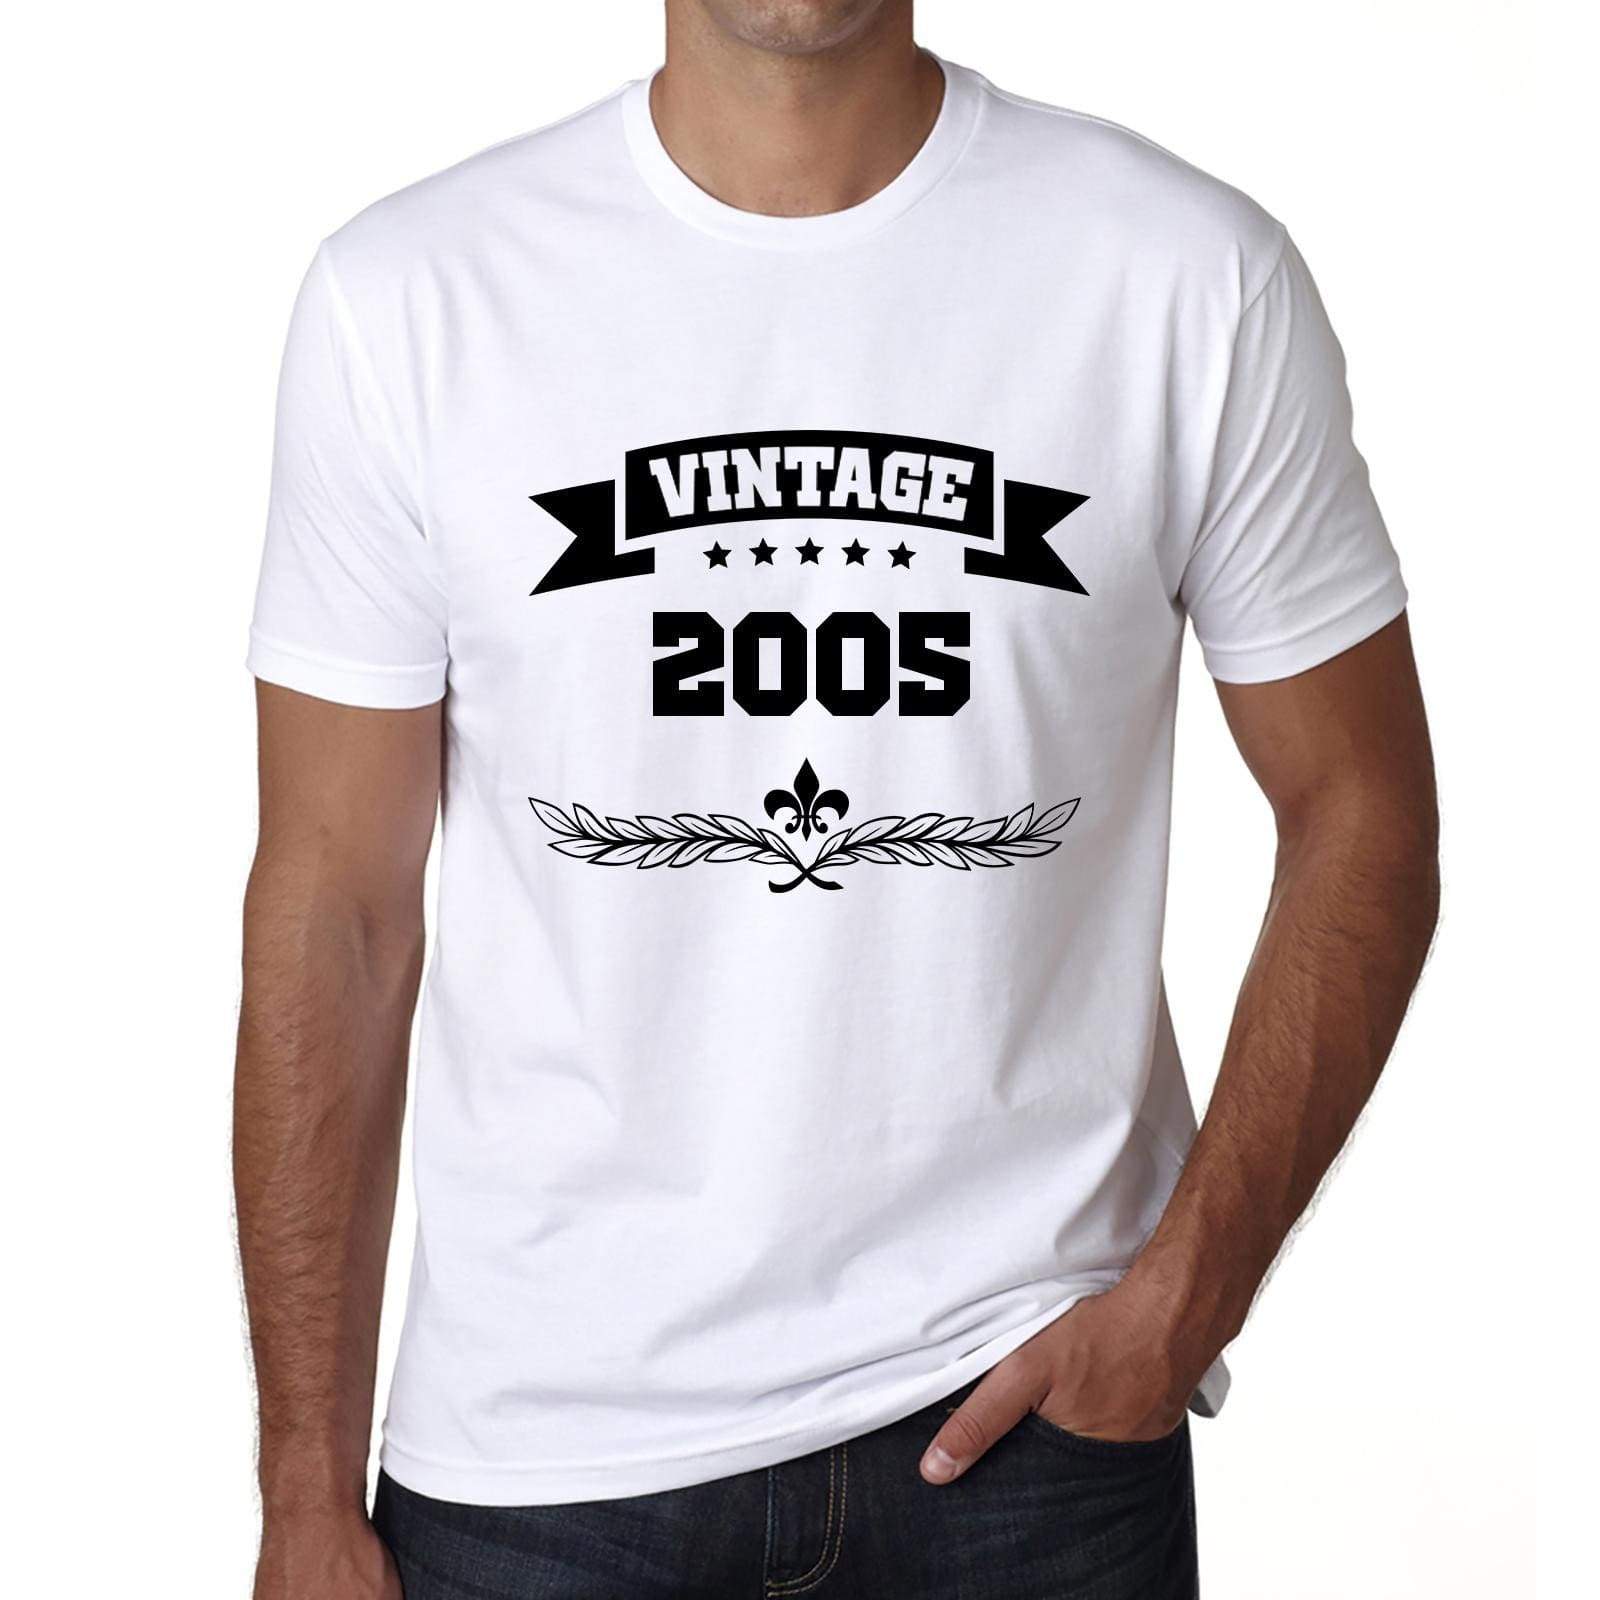 2005 Vintage Year White Mens Short Sleeve Round Neck T-Shirt 00096 - White / S - Casual